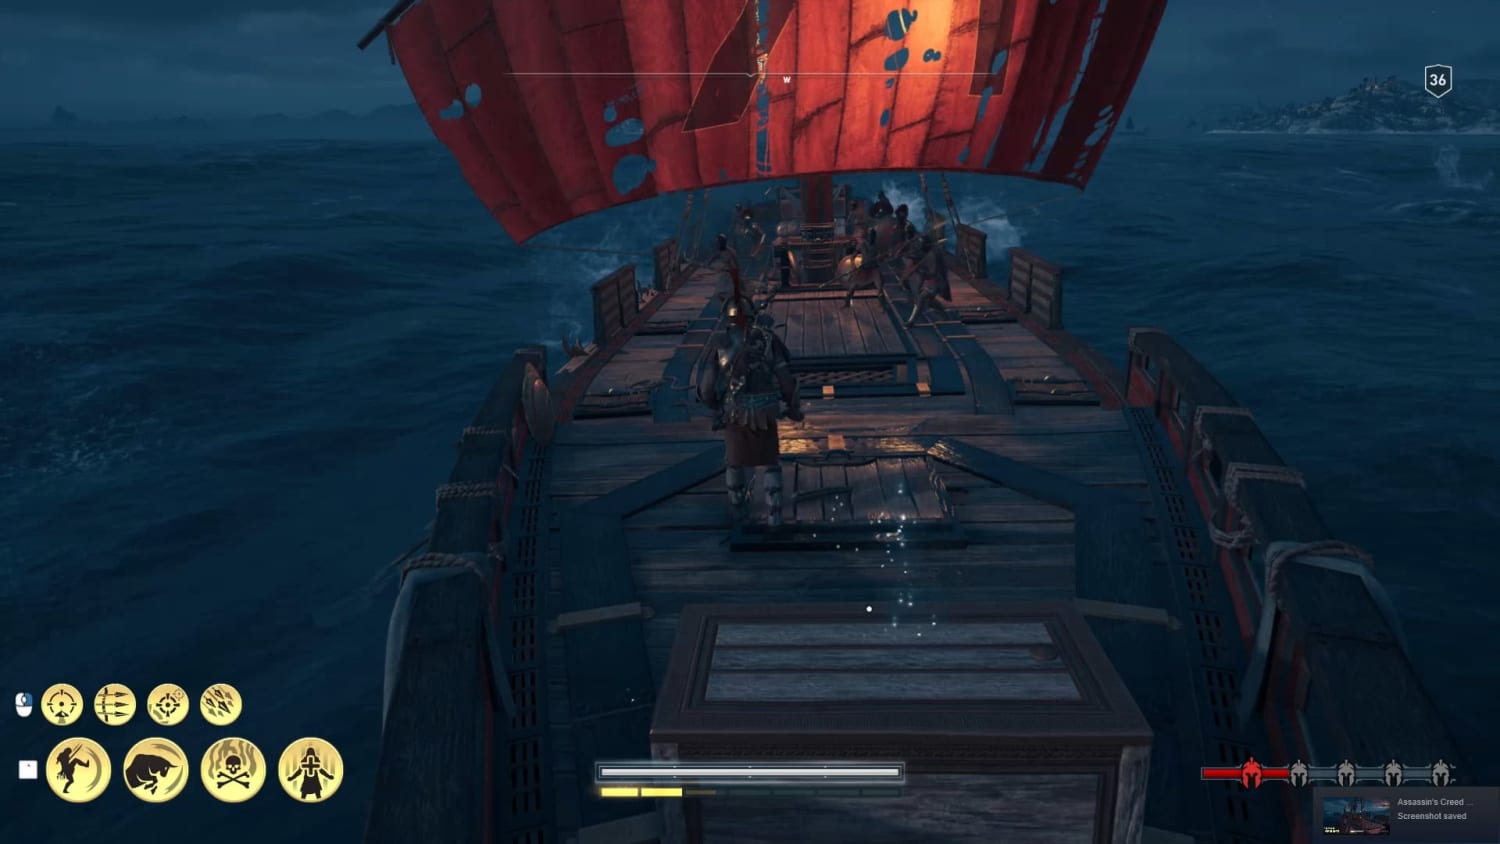 [Assassin’s Creed: Odyssey] Do not play with boats in AC Odyssey